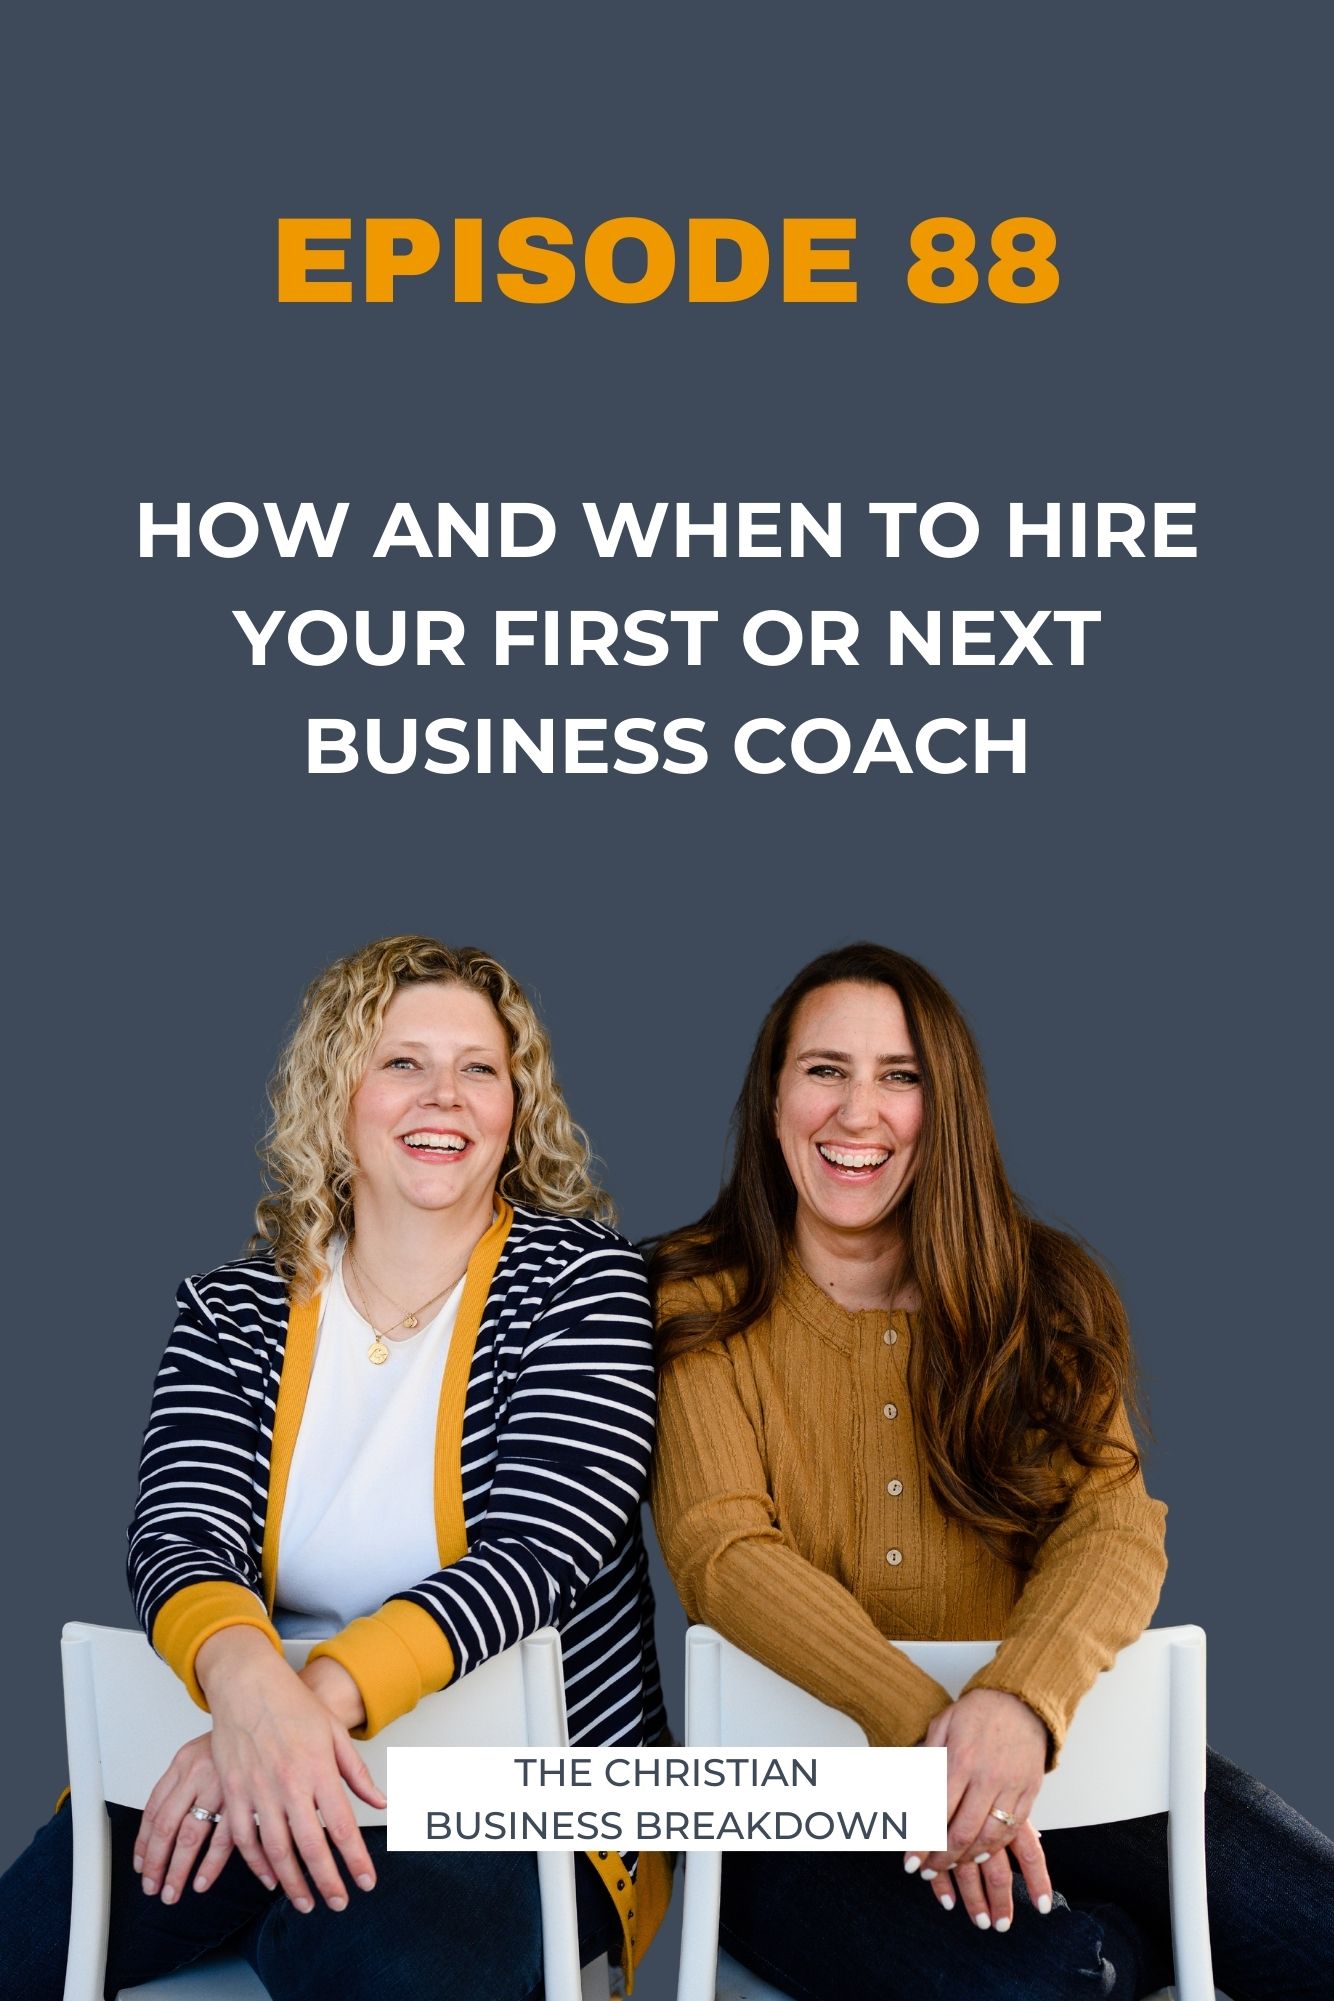 Two Women business owners who have a Christian business podcast for women are sitting backwards in chairs with the words How and when to hire your first or next business coach.